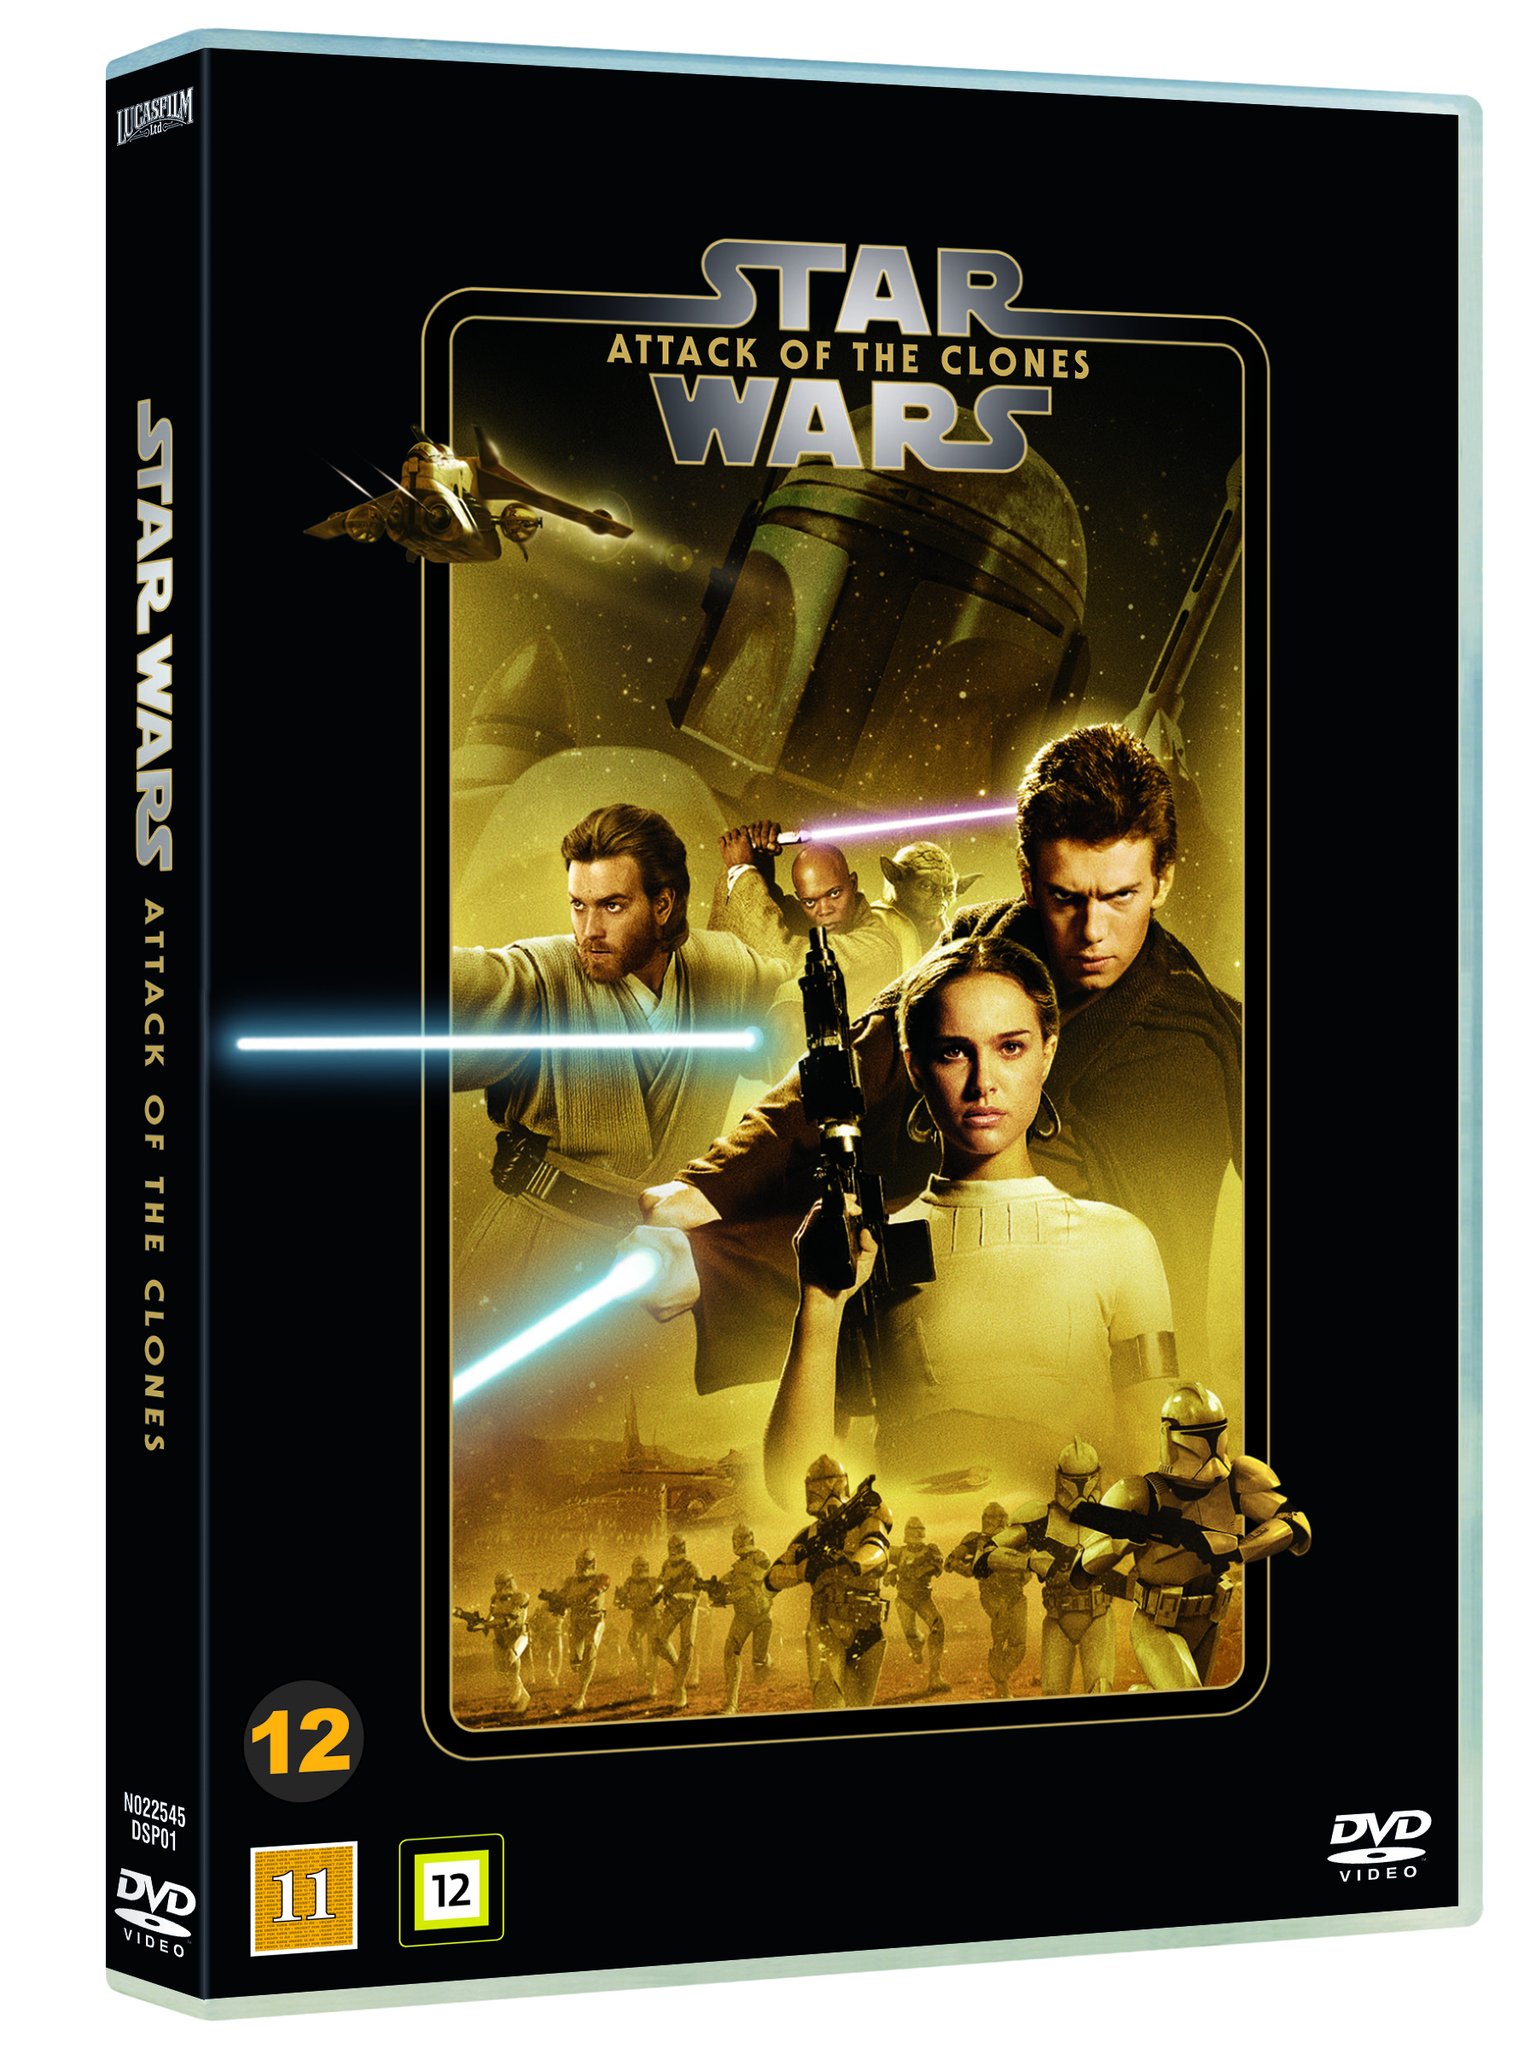 Star Wars: Episode 2 - ATTACK OF THE CLONES